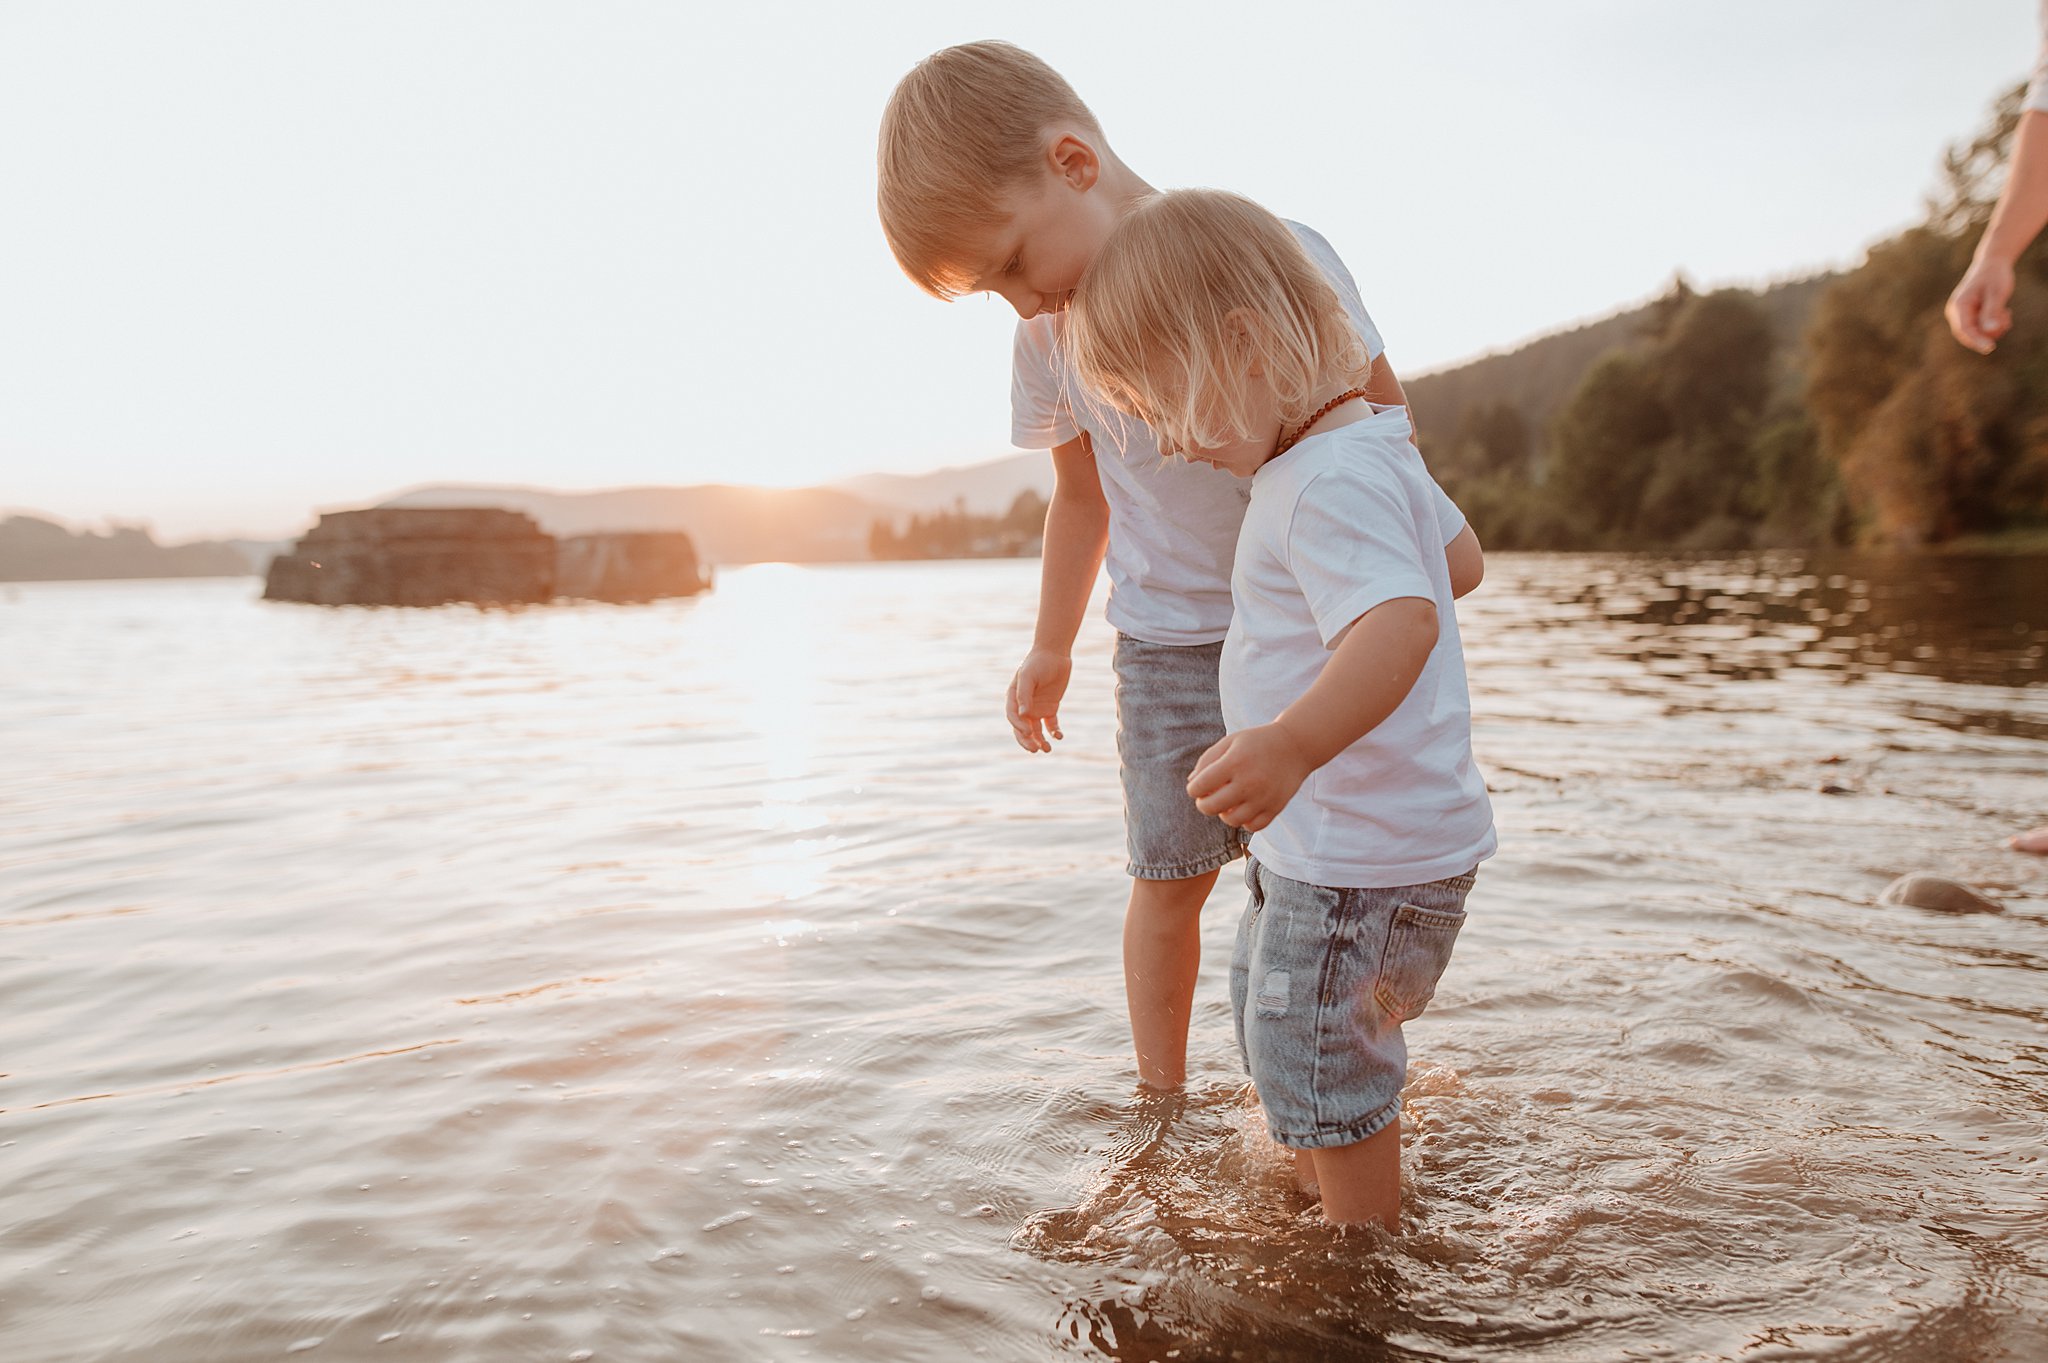 Two young toddler brothers explore some shallow river water in jean shorts and white shirts after visiting vancouver daycares